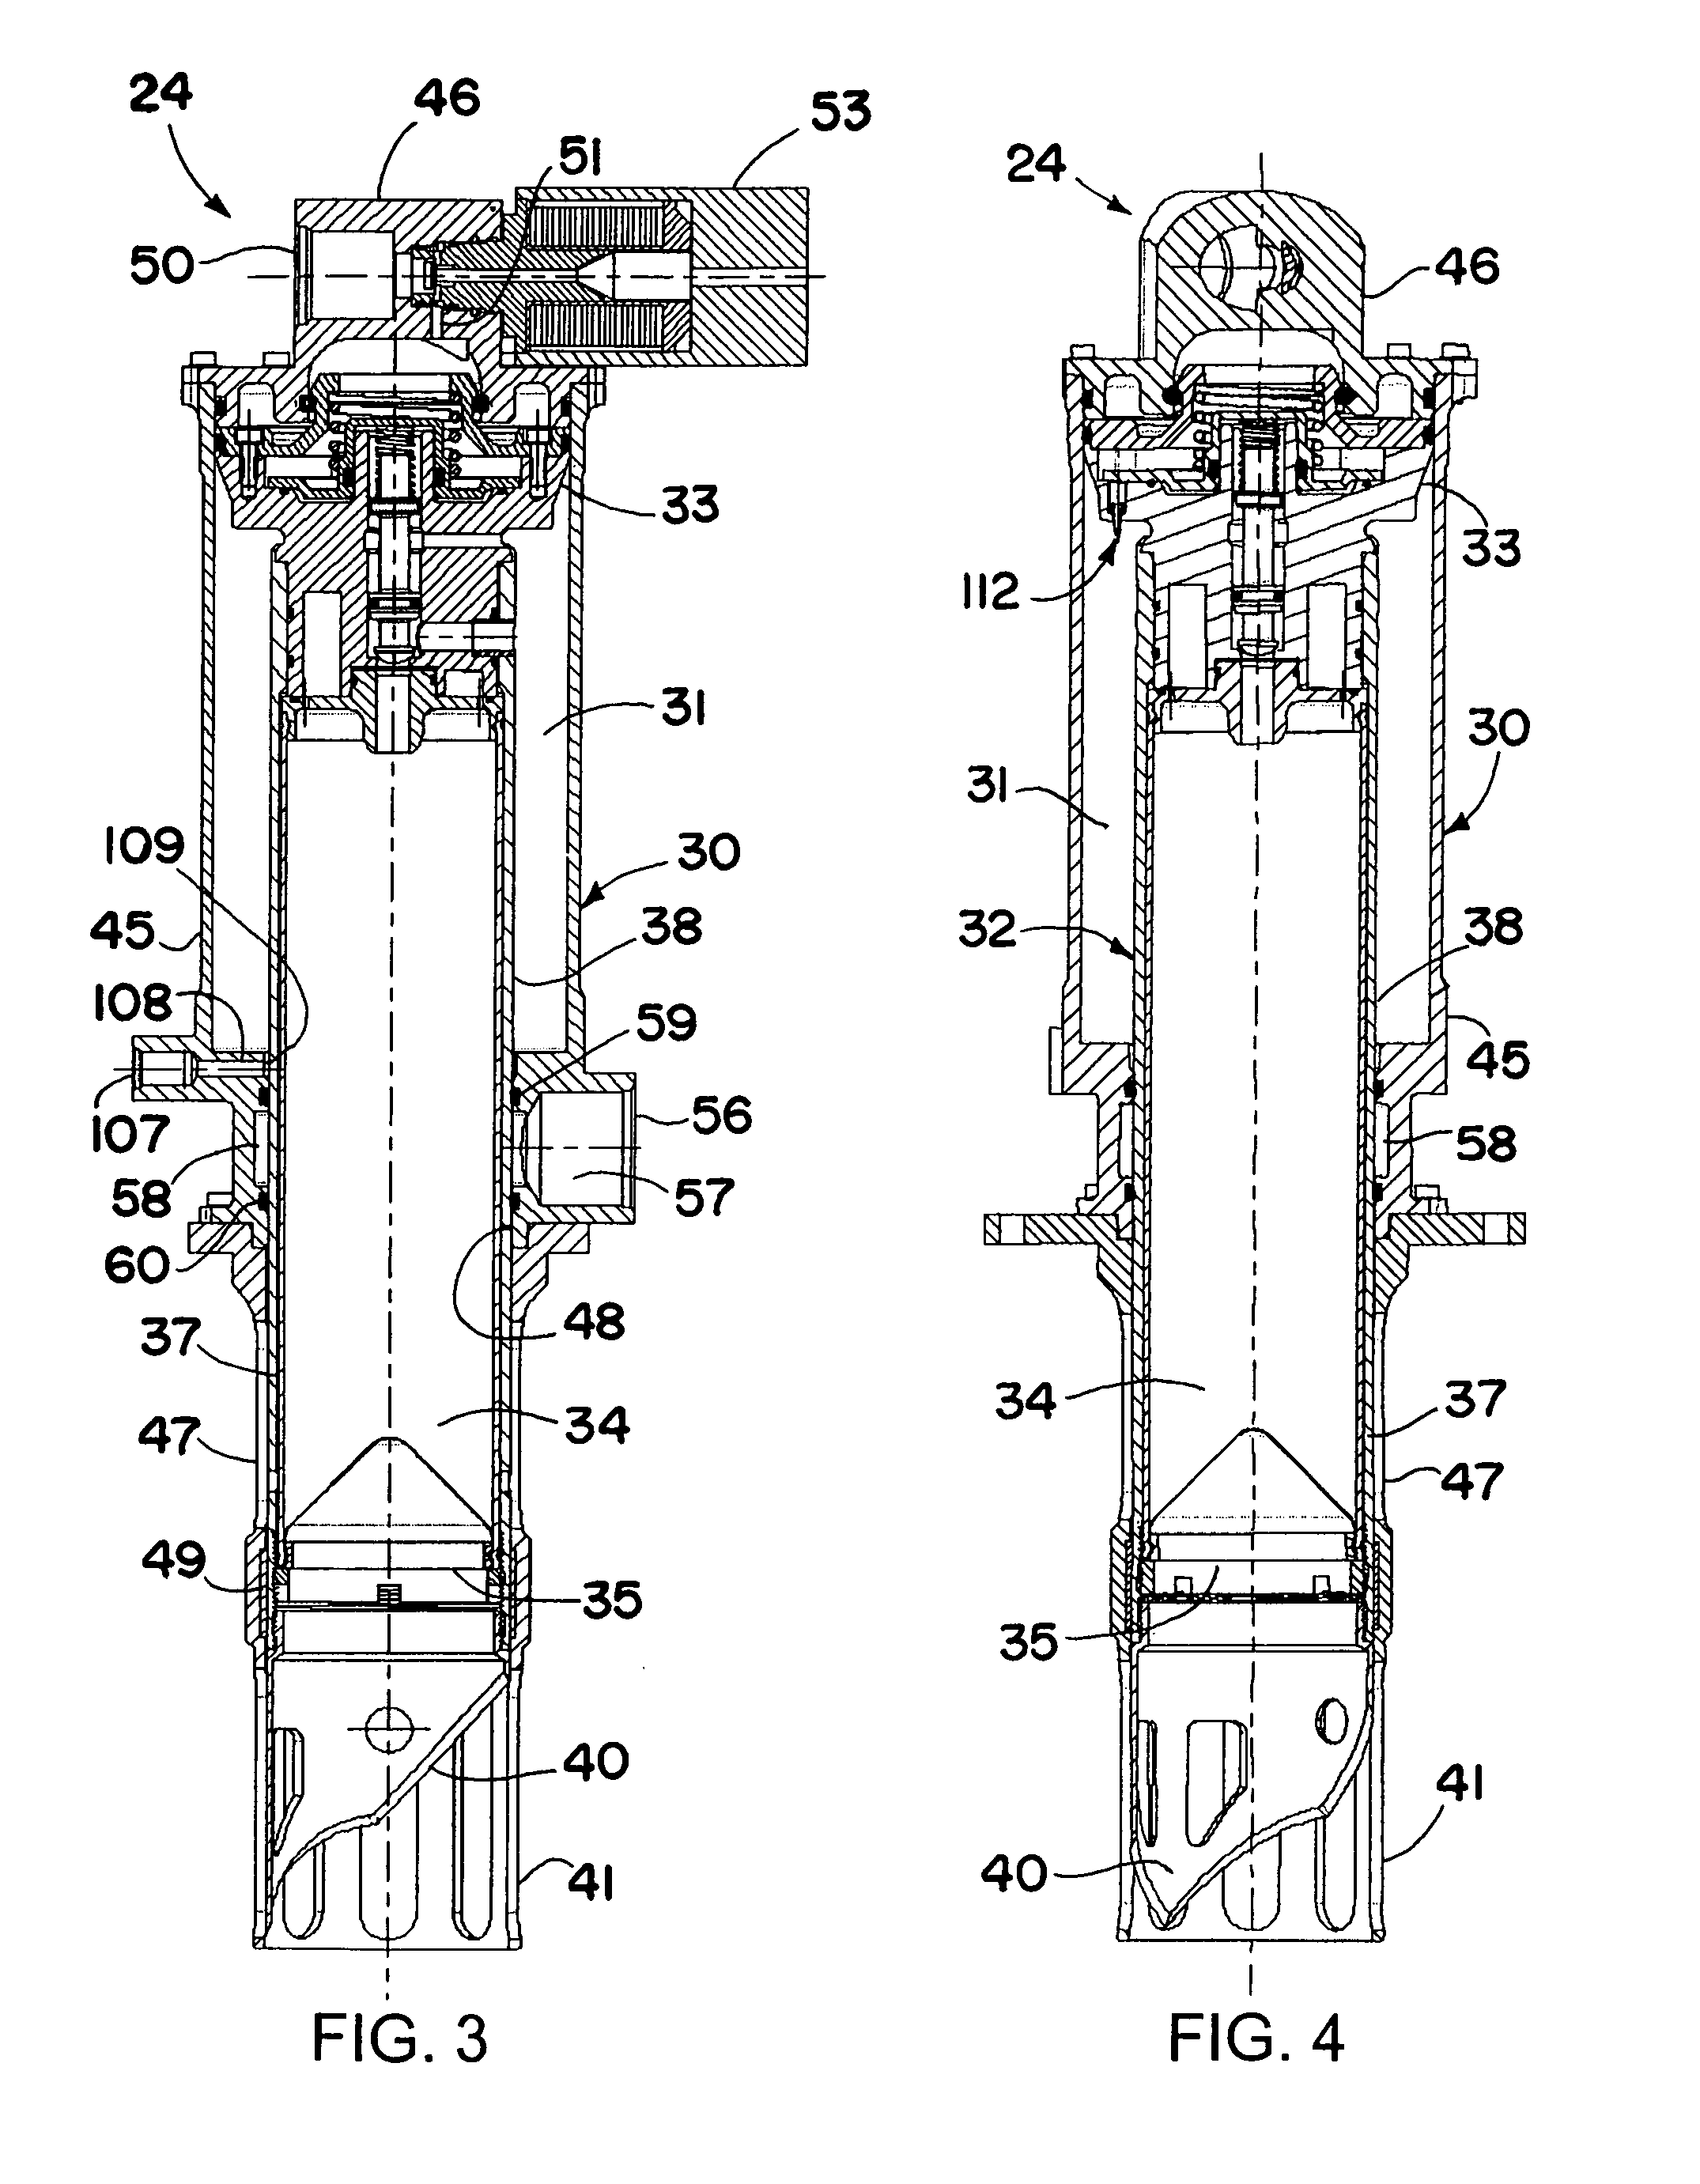 Pneumatic puncture device for aircraft fire suppression systems